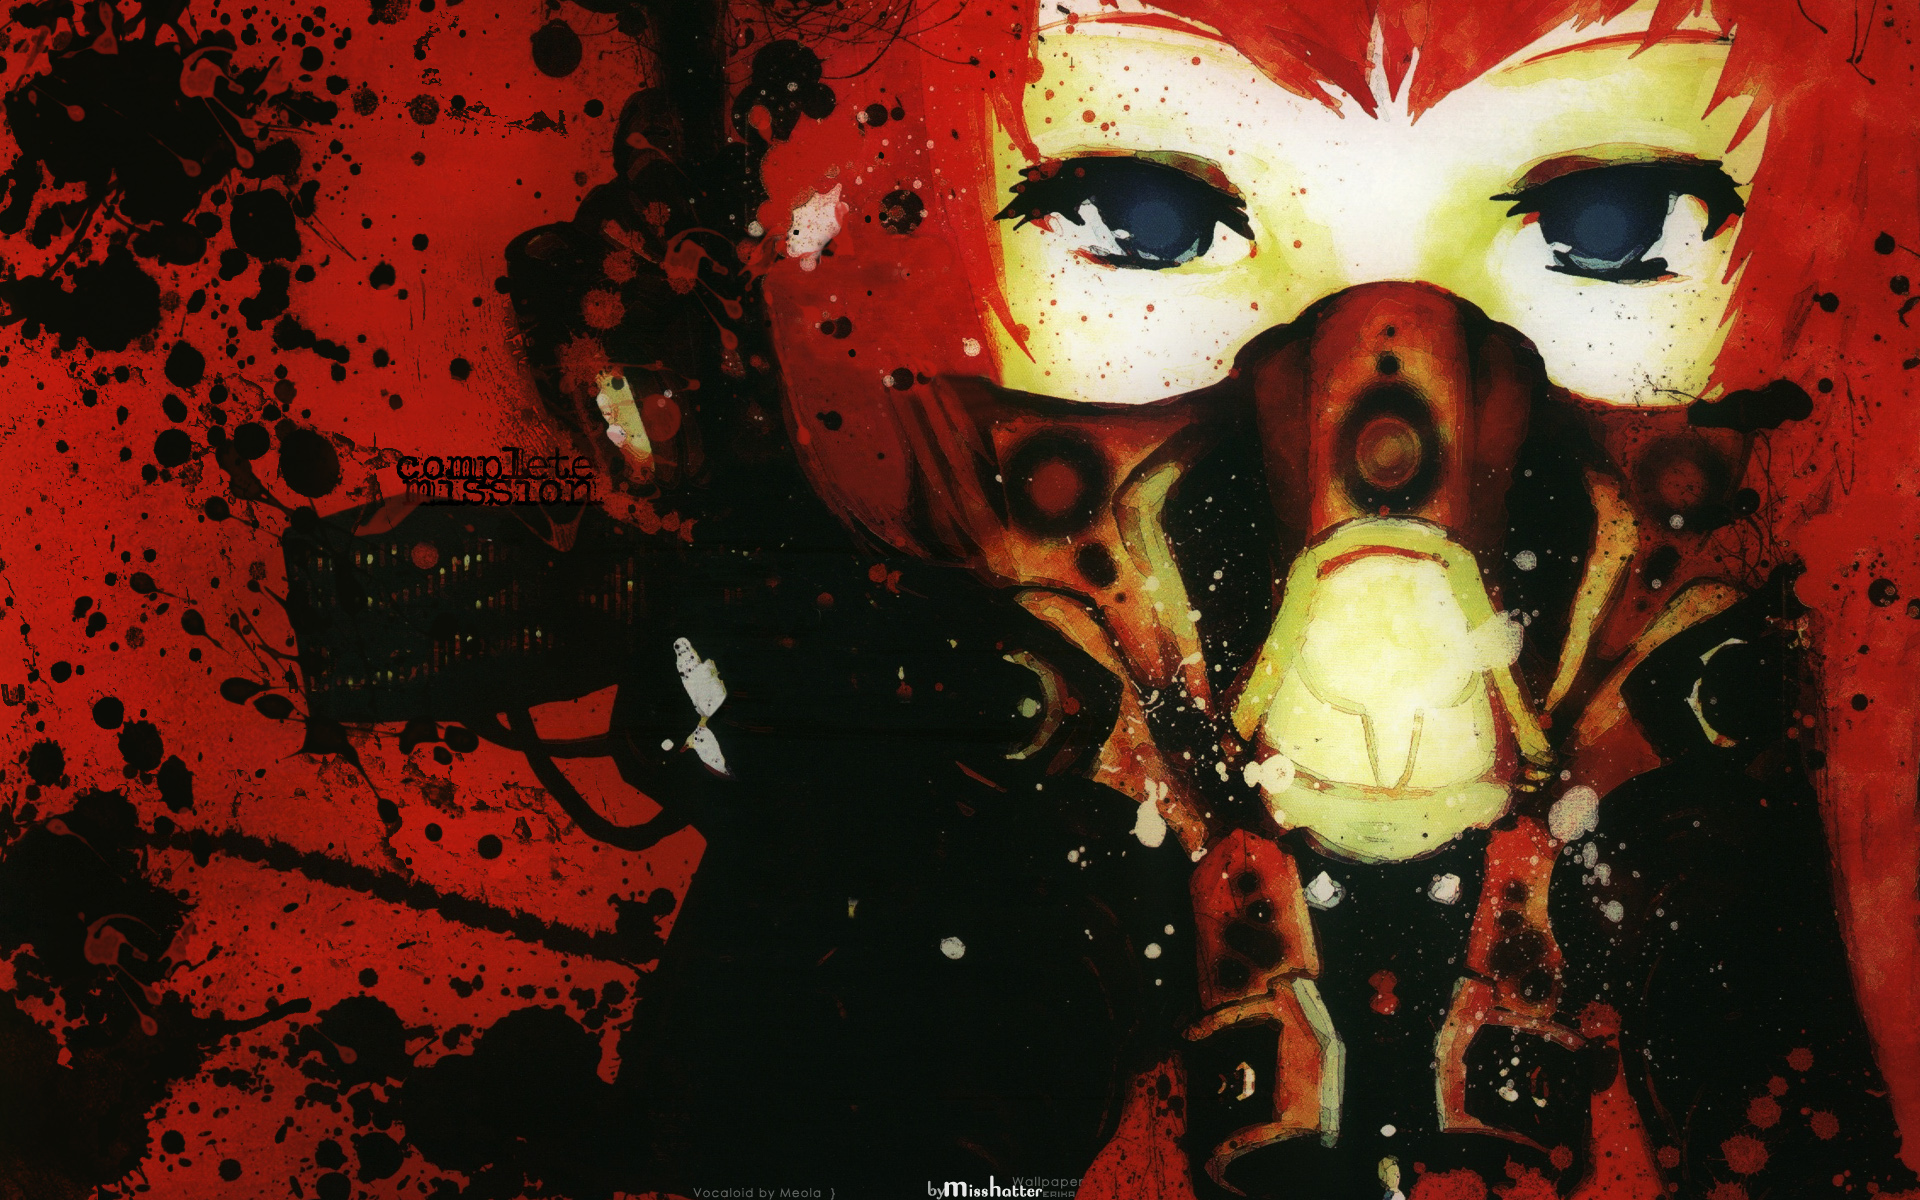 scary vocaloid wallpaper